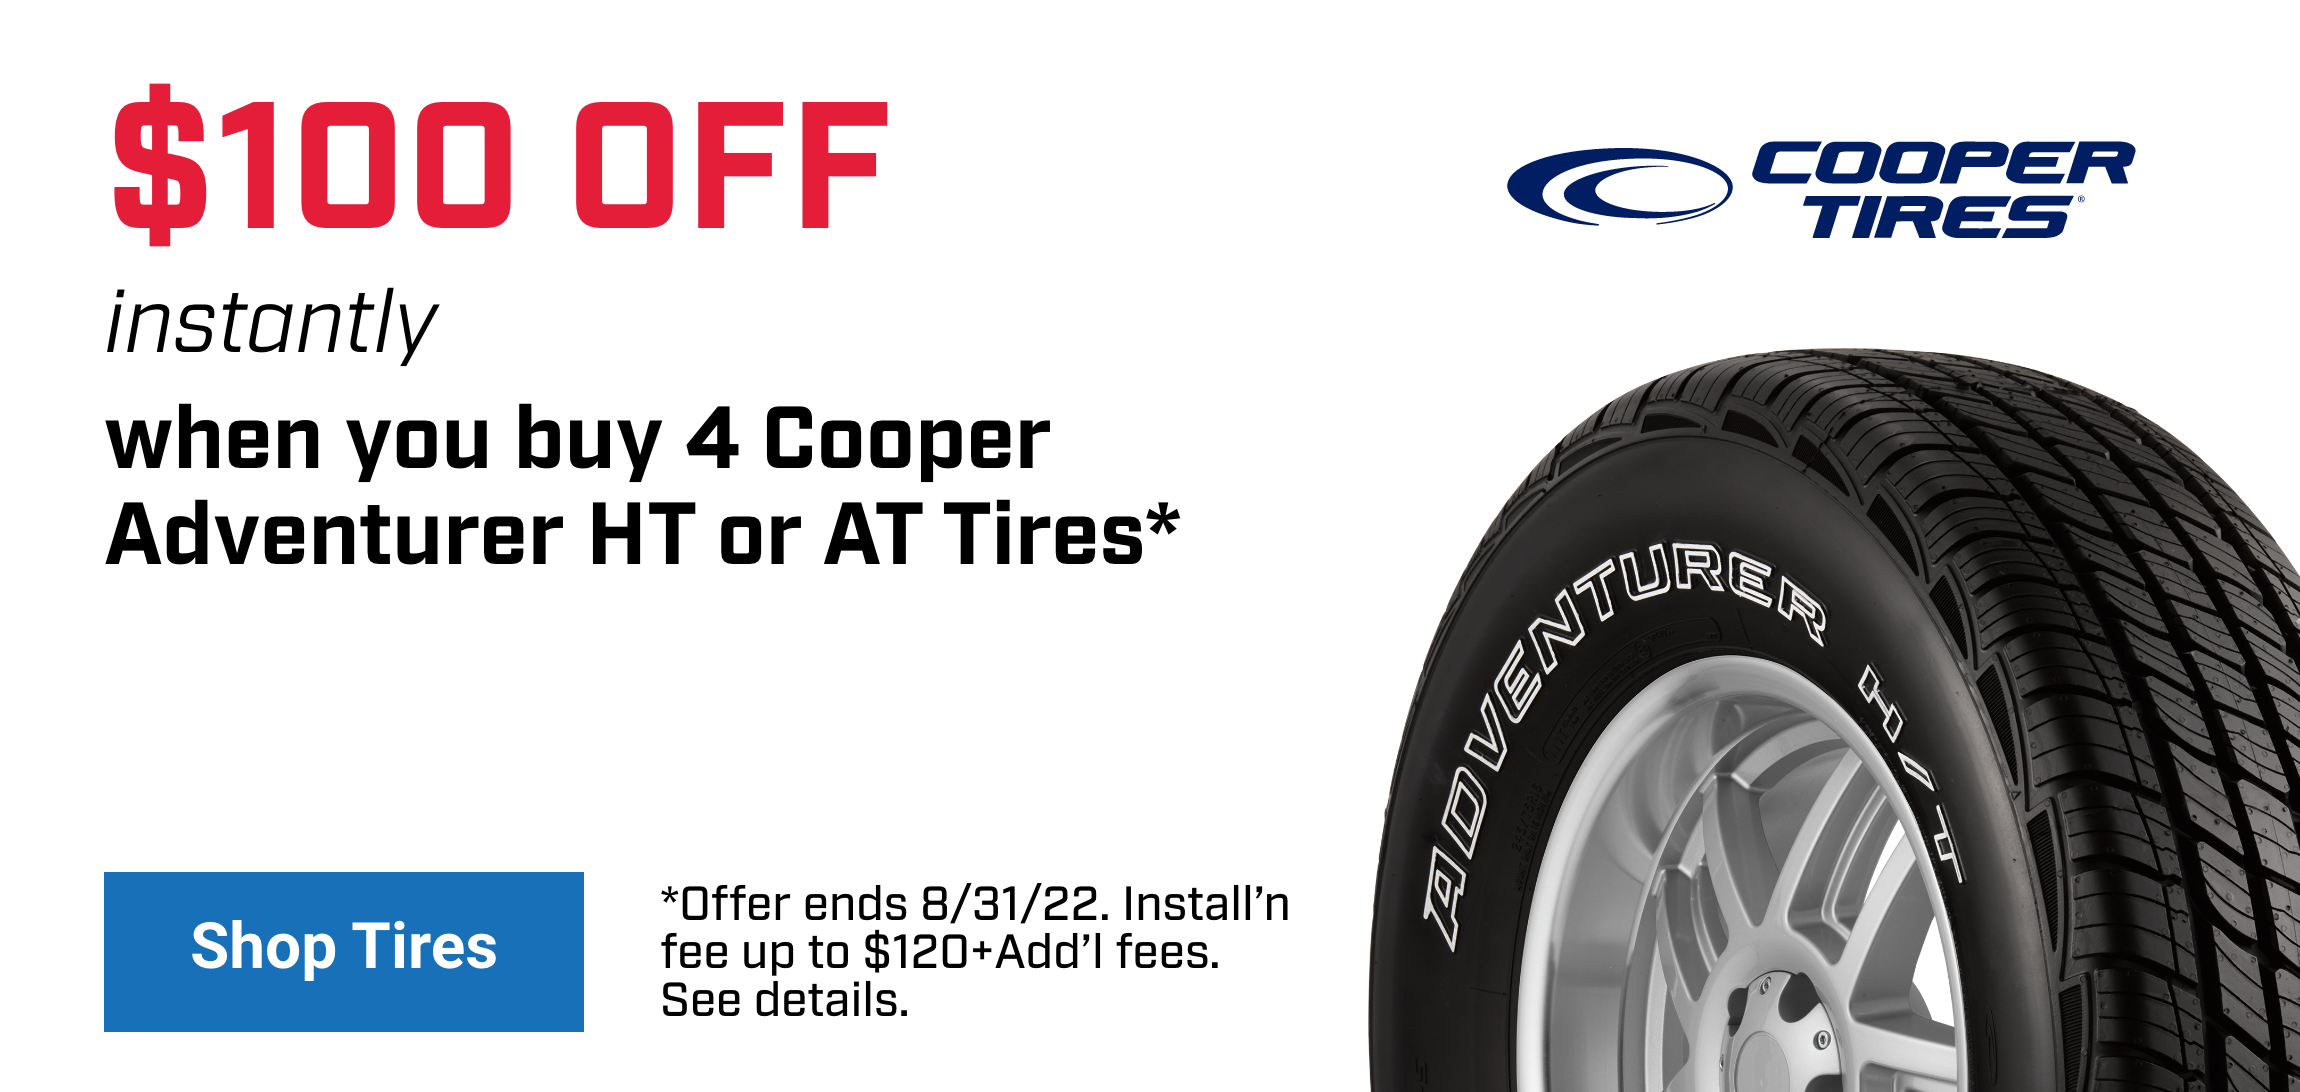 Save $100 On Cooper Tires